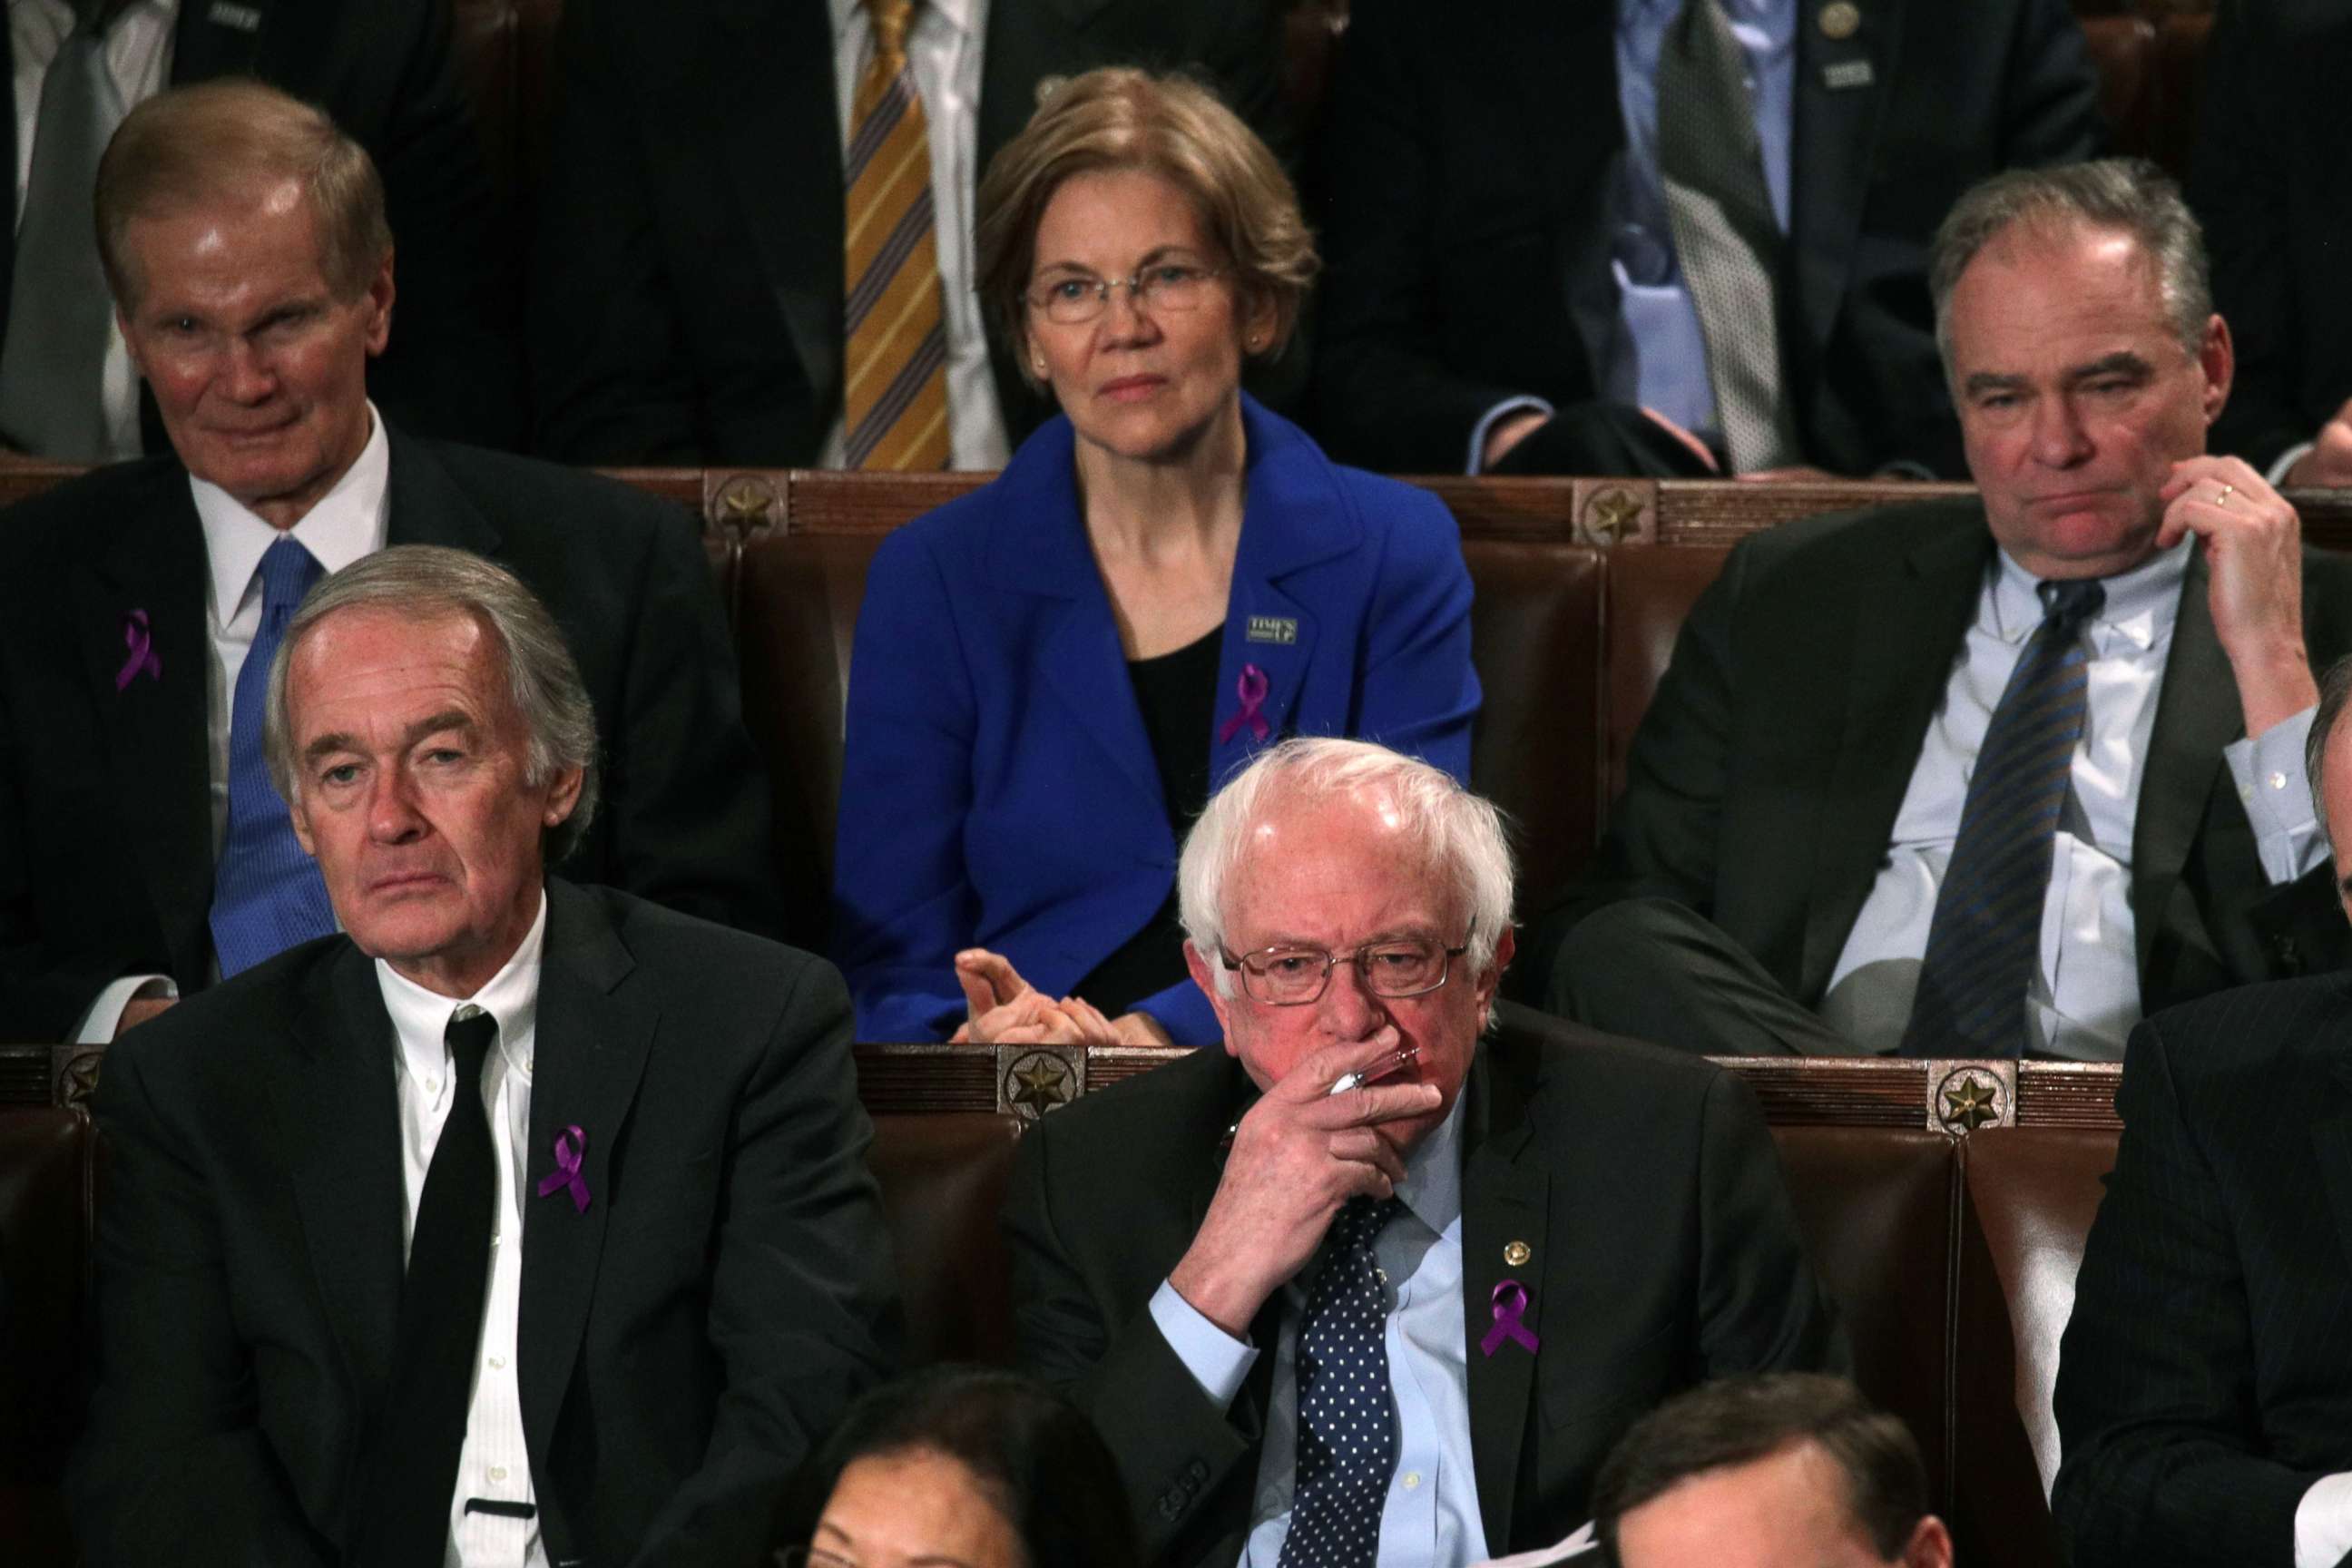 PHOTO: Senator Bernie Sanders, center, watches President Trump during the State of the Union address, January 30, 2018 in Washington, DC. 